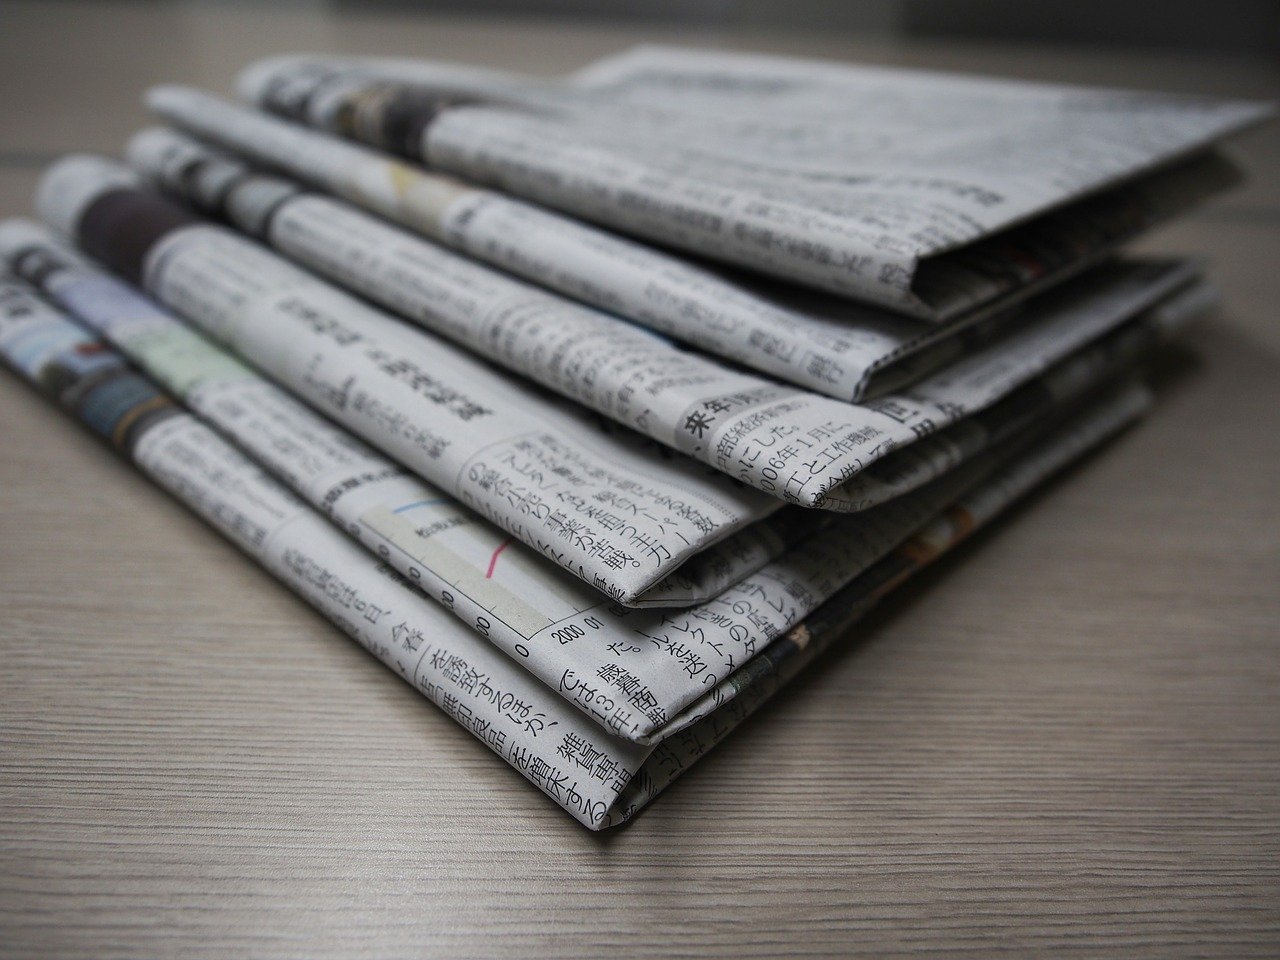 Image of folded and stacked newspapers.